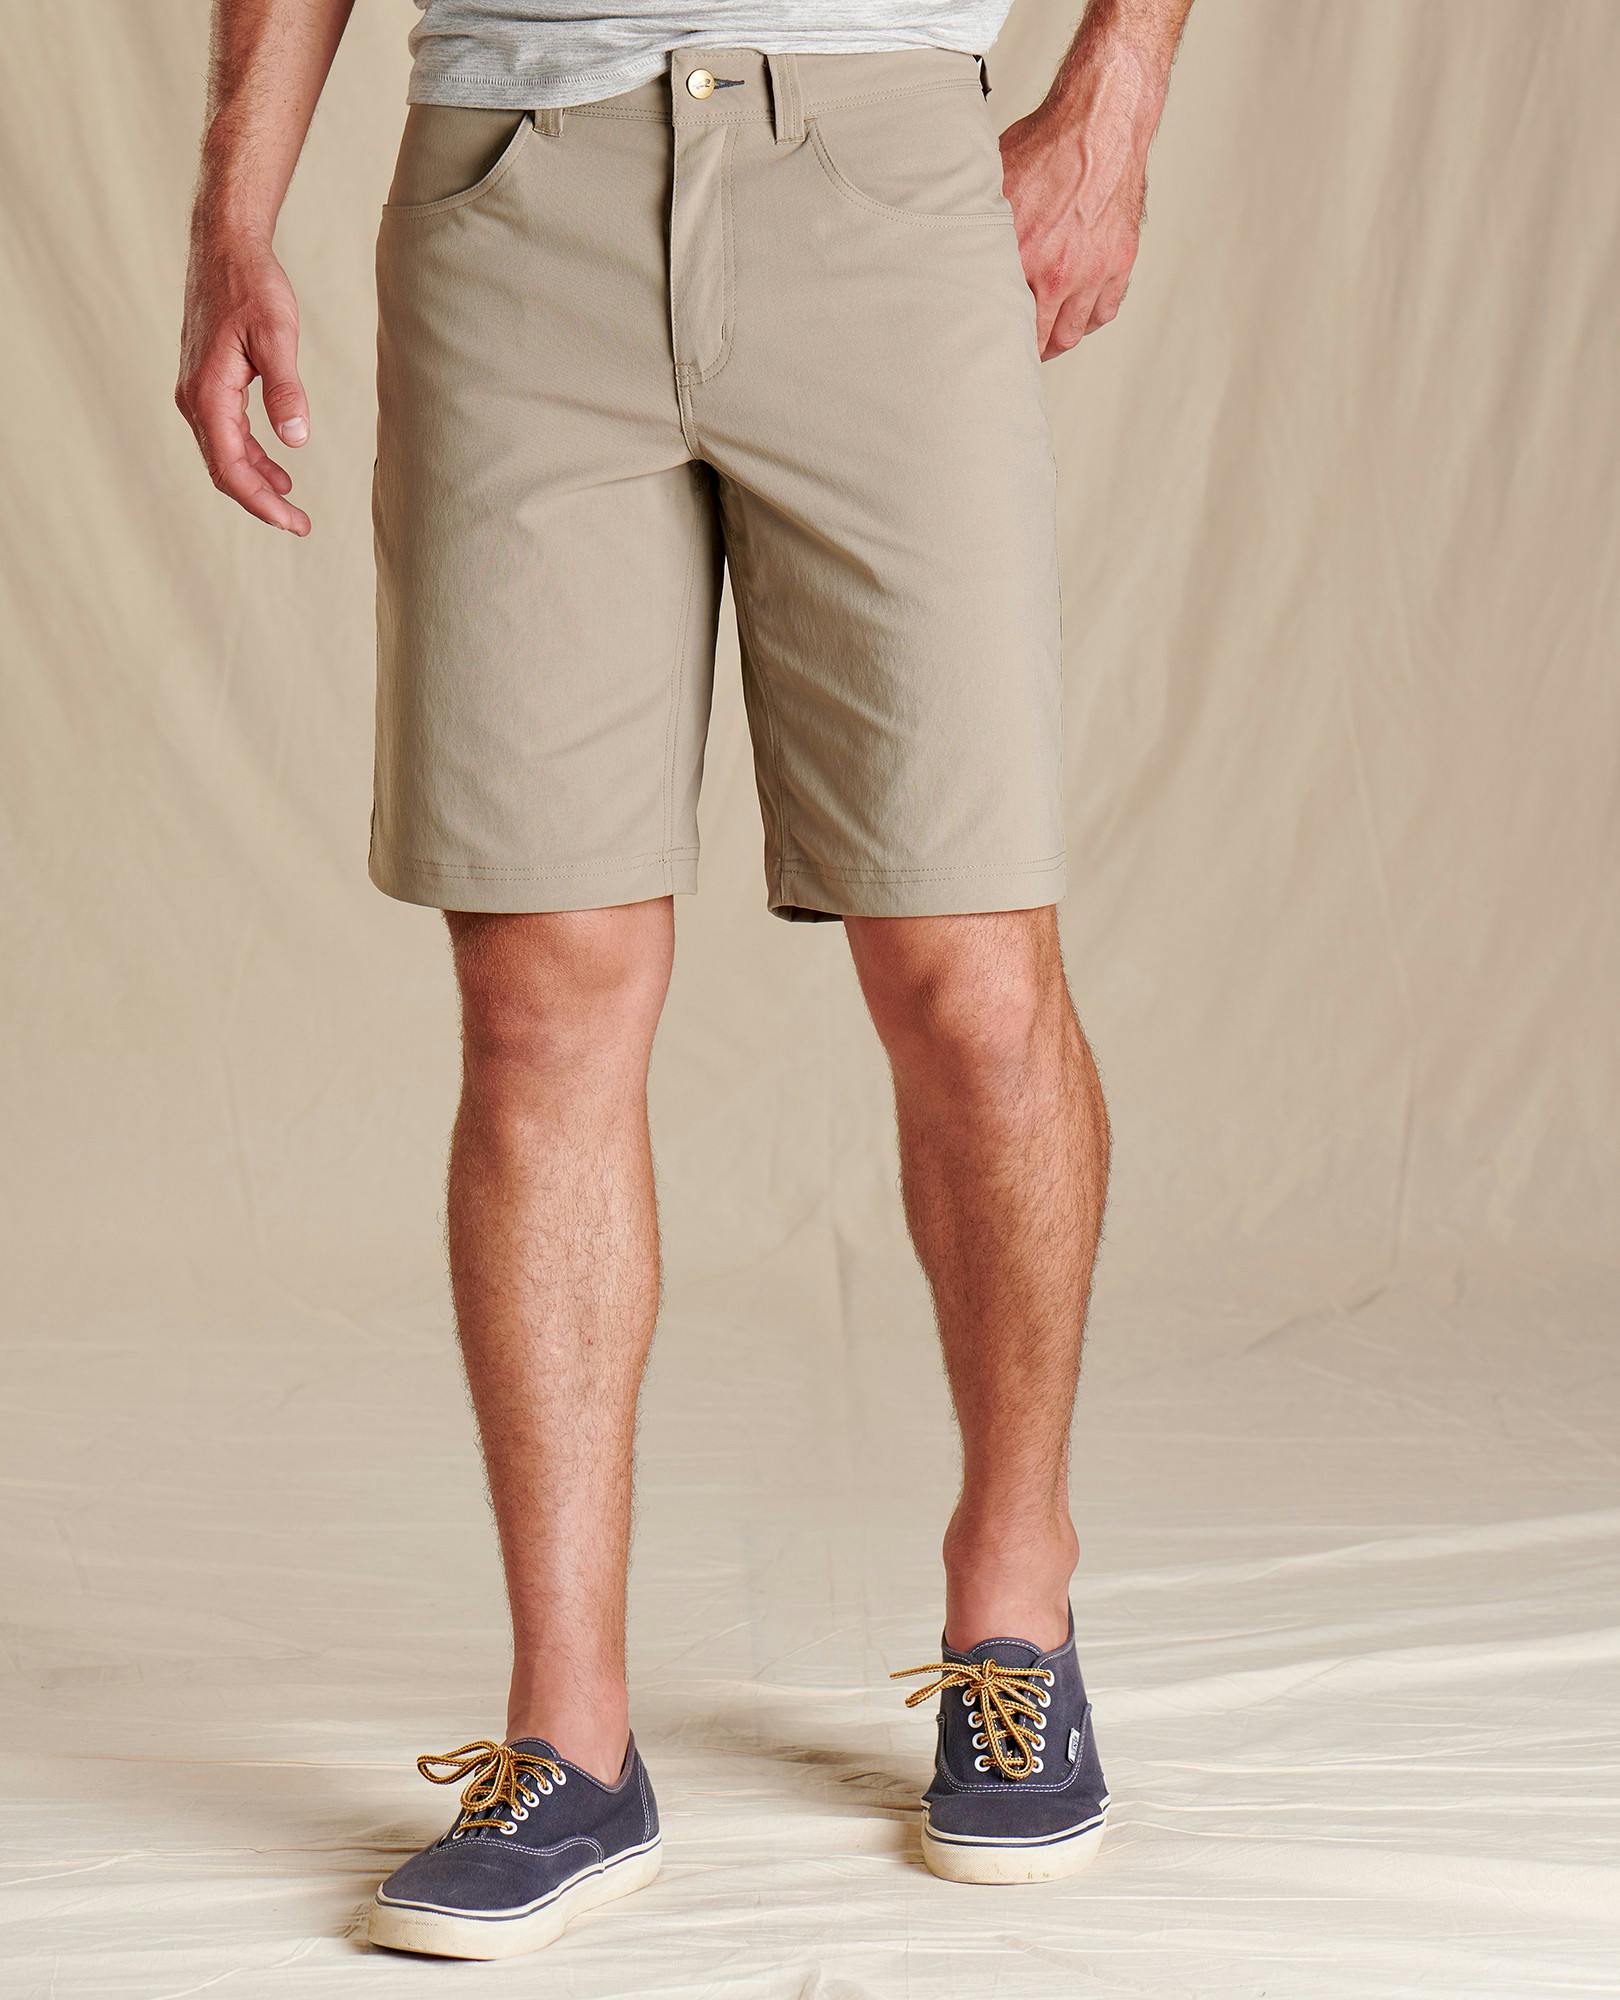 Toad&Co - ROVER CANVAS SHORT M - 38 - Dark Chino